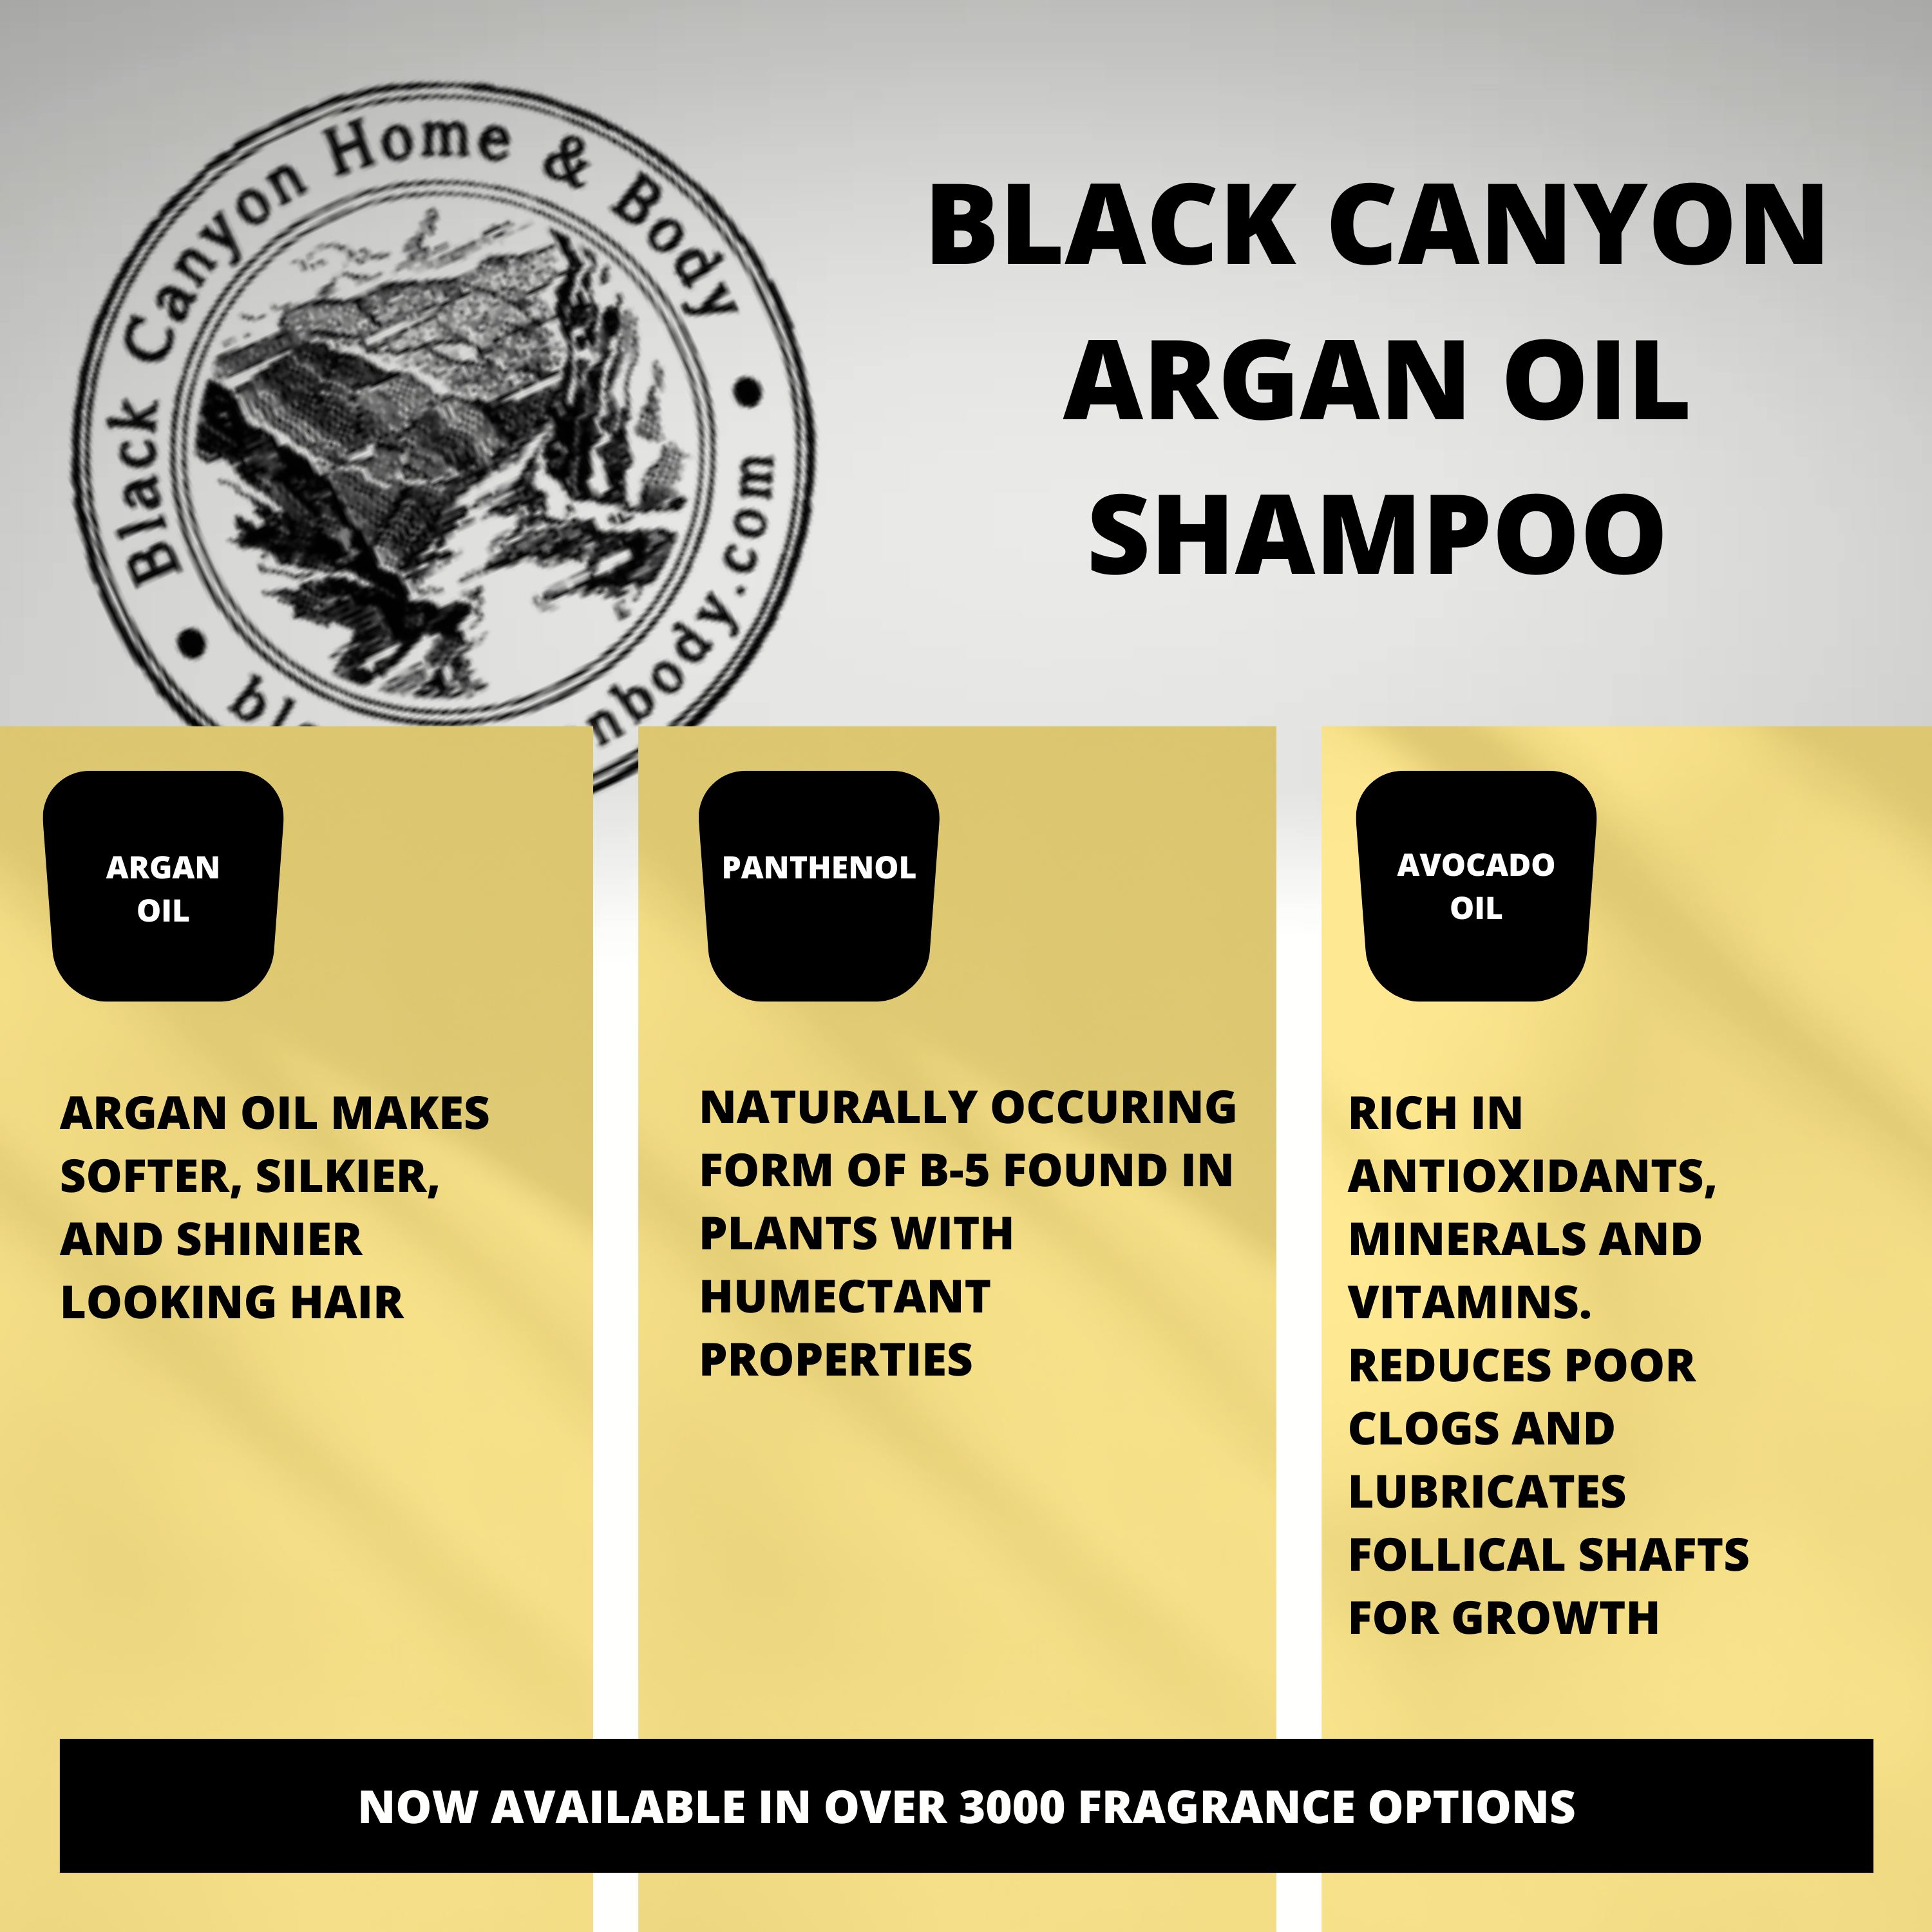 Black Canyon Wet Wet Watermelon Scented Shampoo with Argan Oil